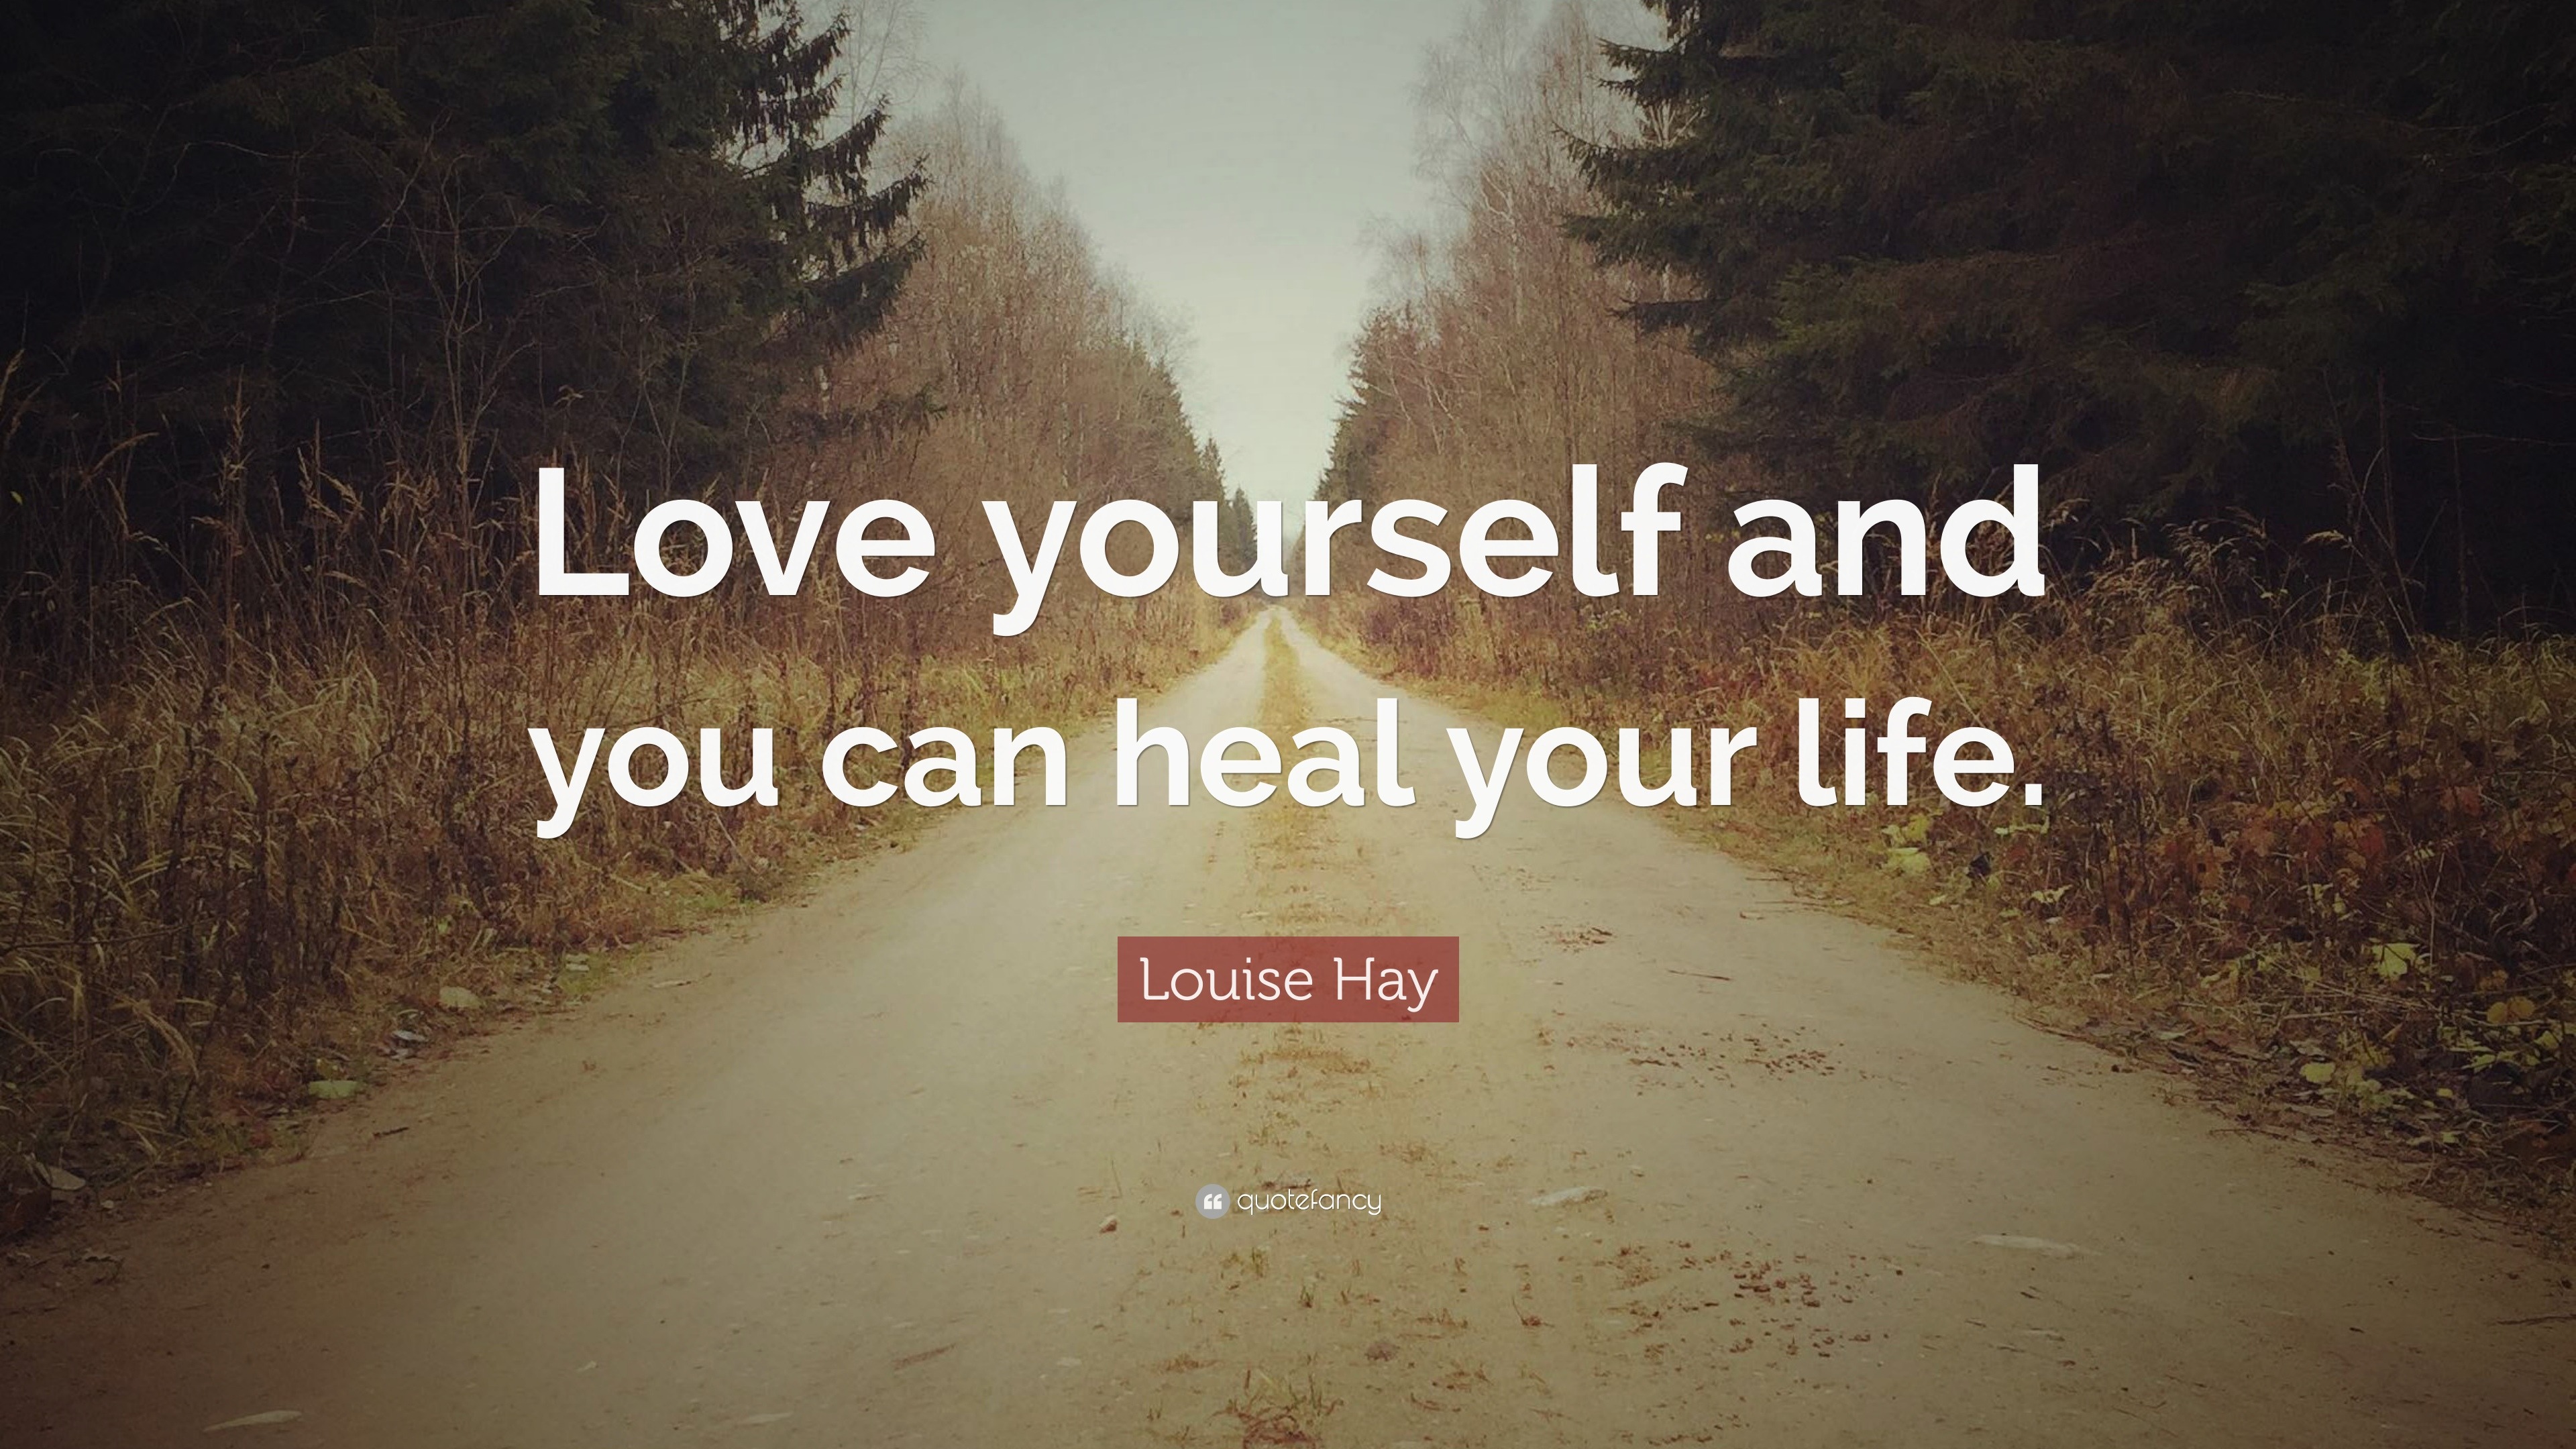 411197 Louise Hay Quote Love yourself and you can heal your life